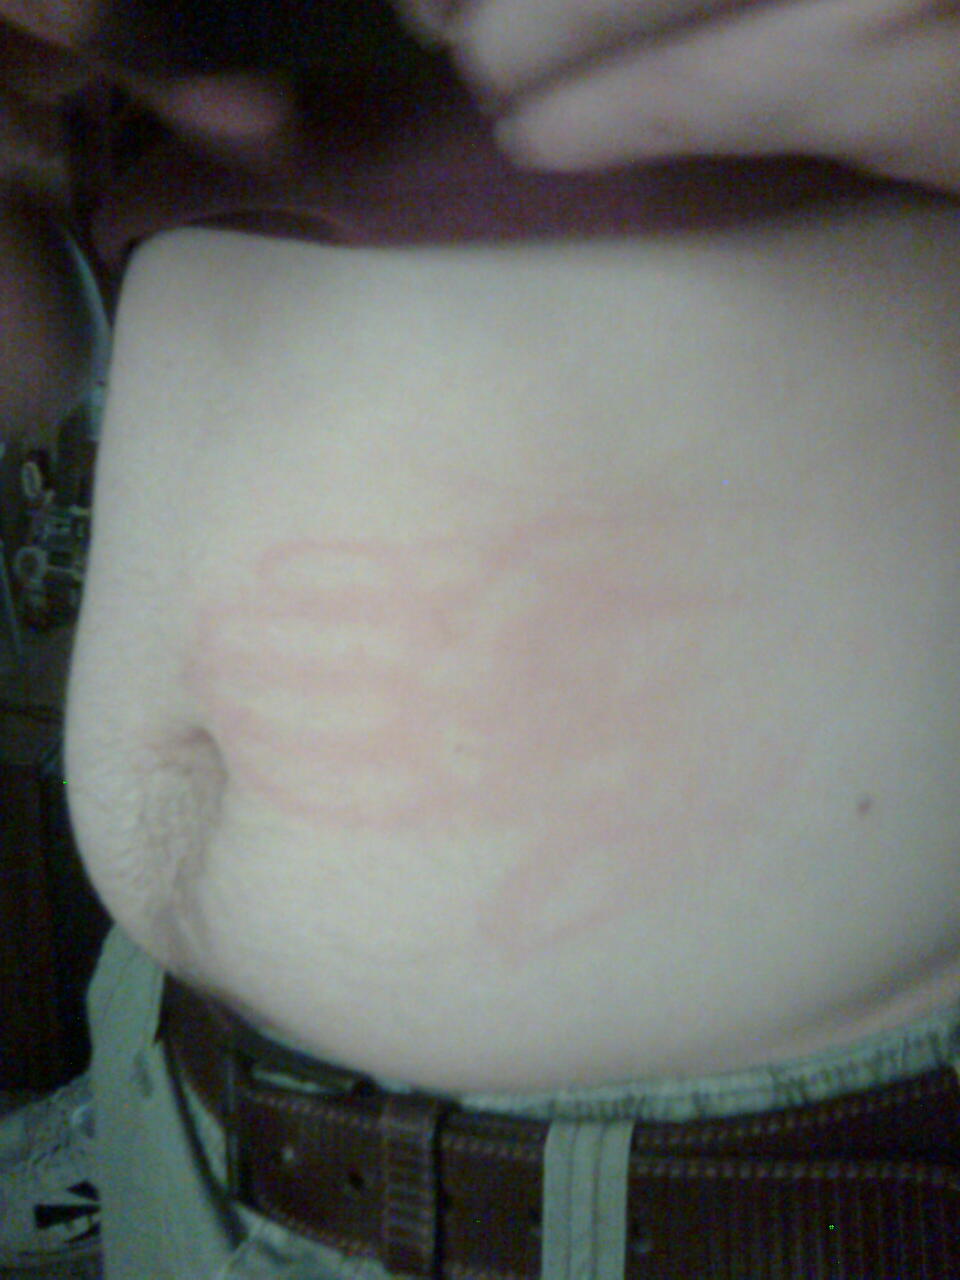 My friend was laying down with his shirt pulled up, so I slapped his stomach as hard as I could.  It left a perfect impression of my hand.  haha!